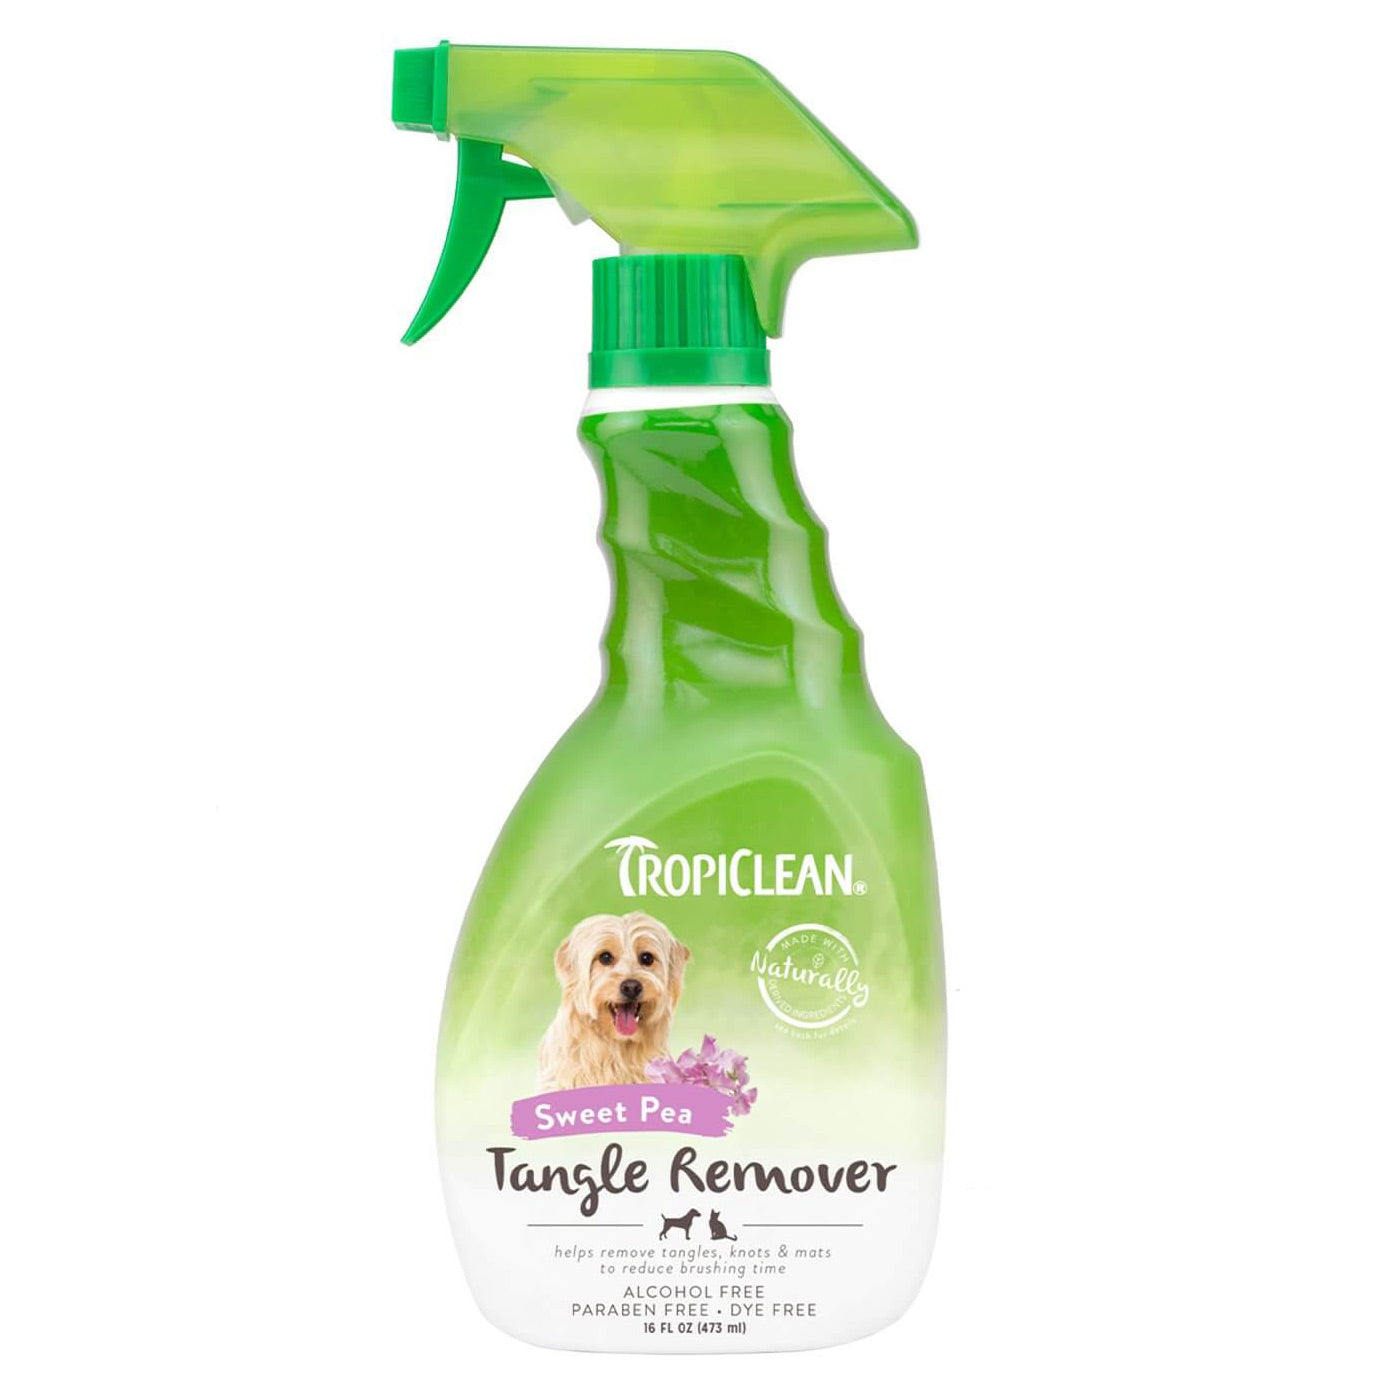 Tropiclean Sweet Pea Tangle Remover Spray for Dogs